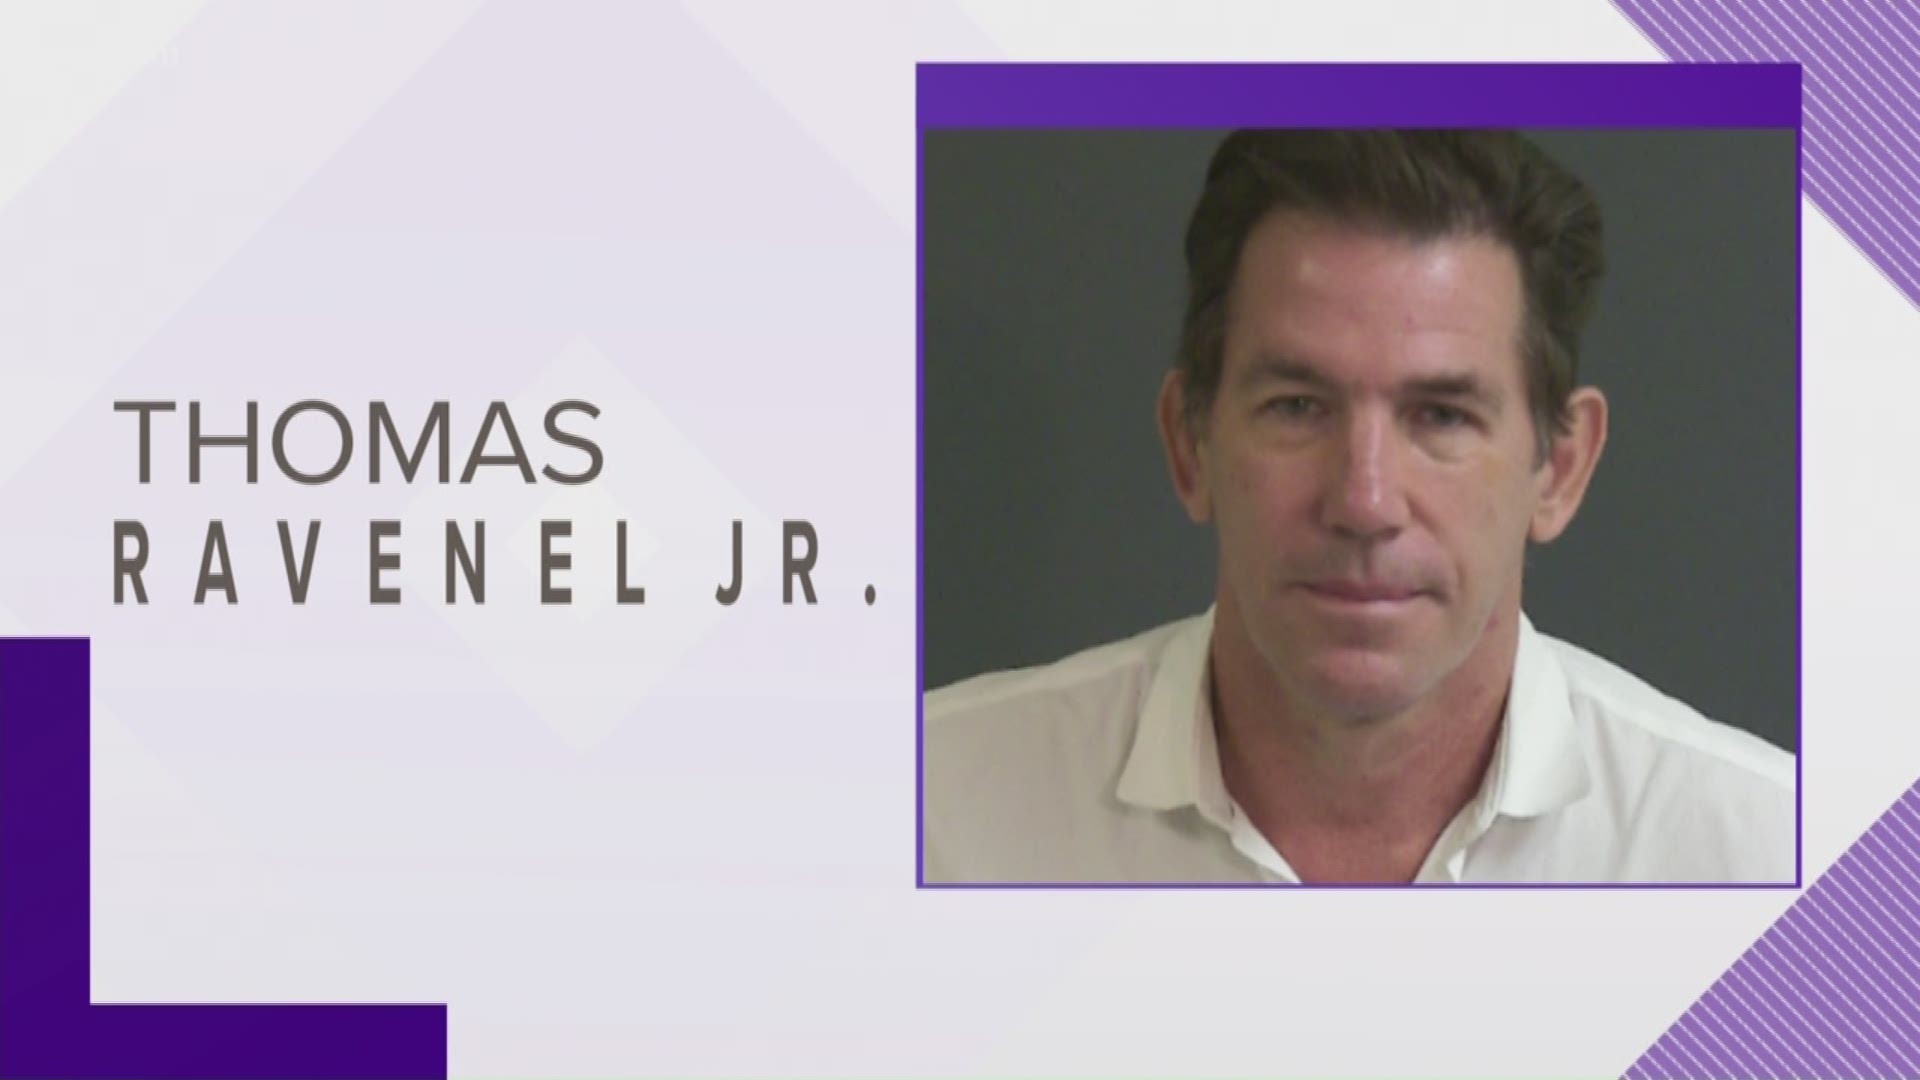 Former state treasurer Thomas Ravenel has been arrested, charged with assault and battery from an incident dating back to may of 2015